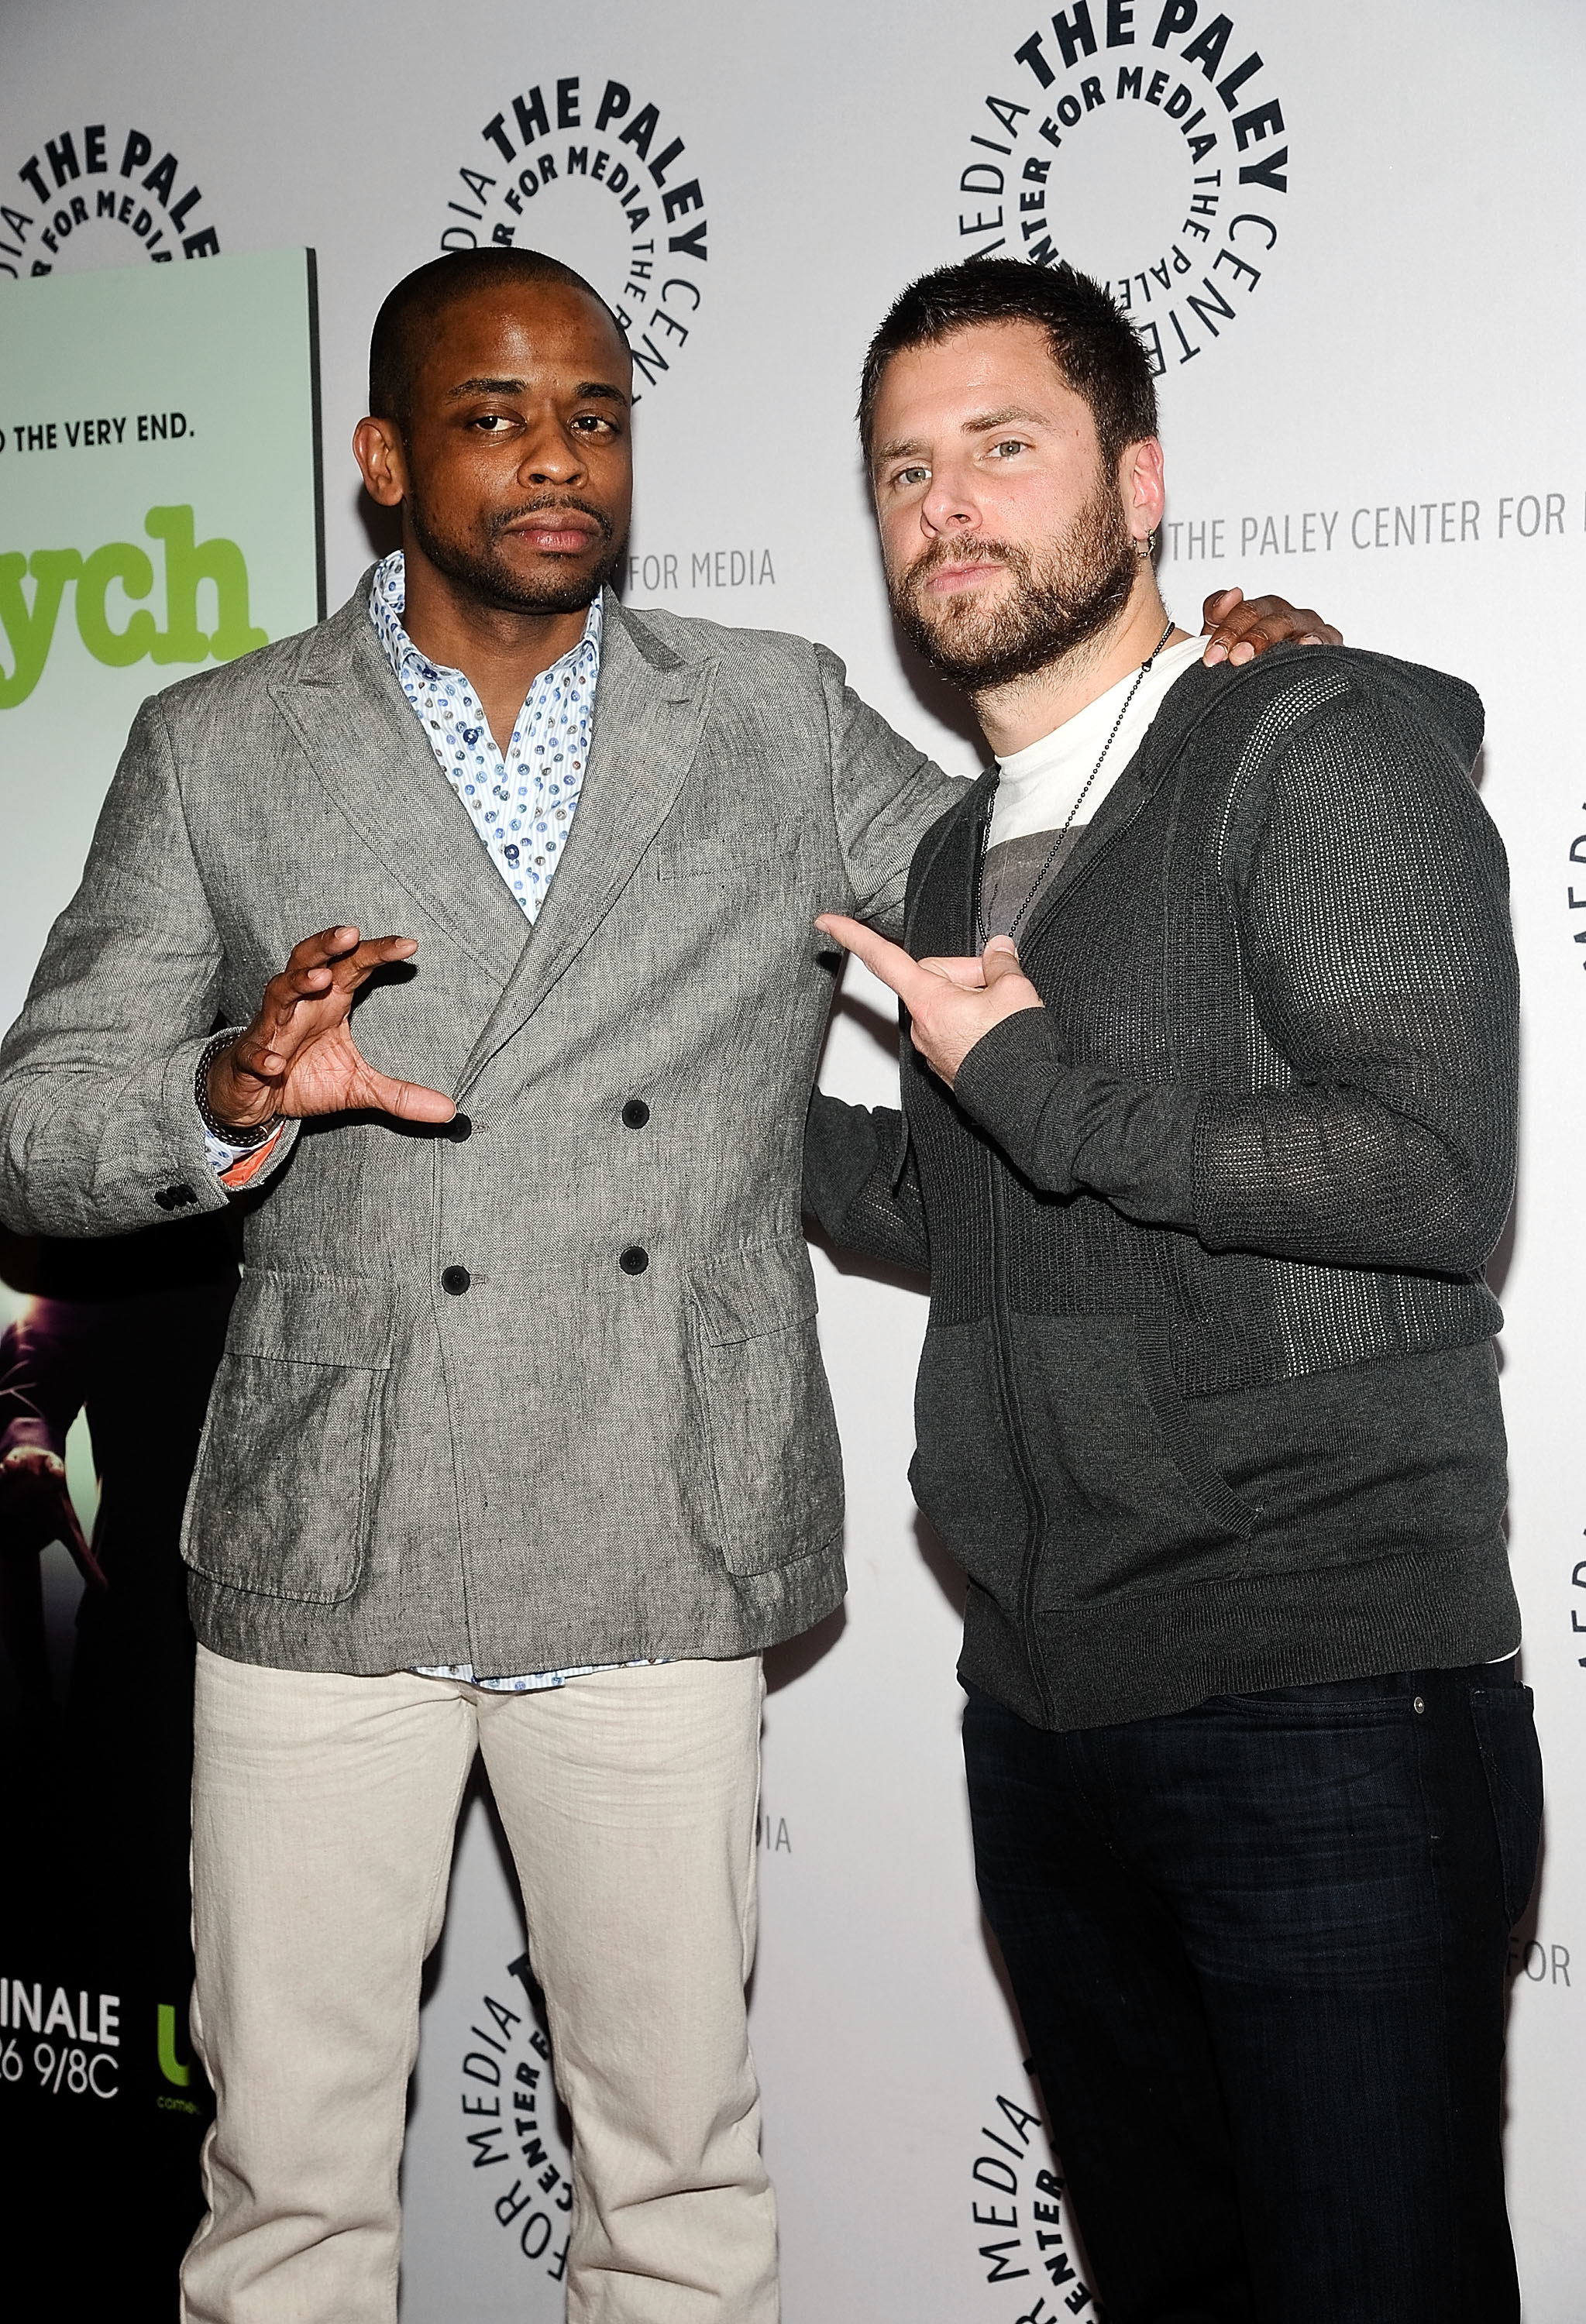 Dule and James at an event together